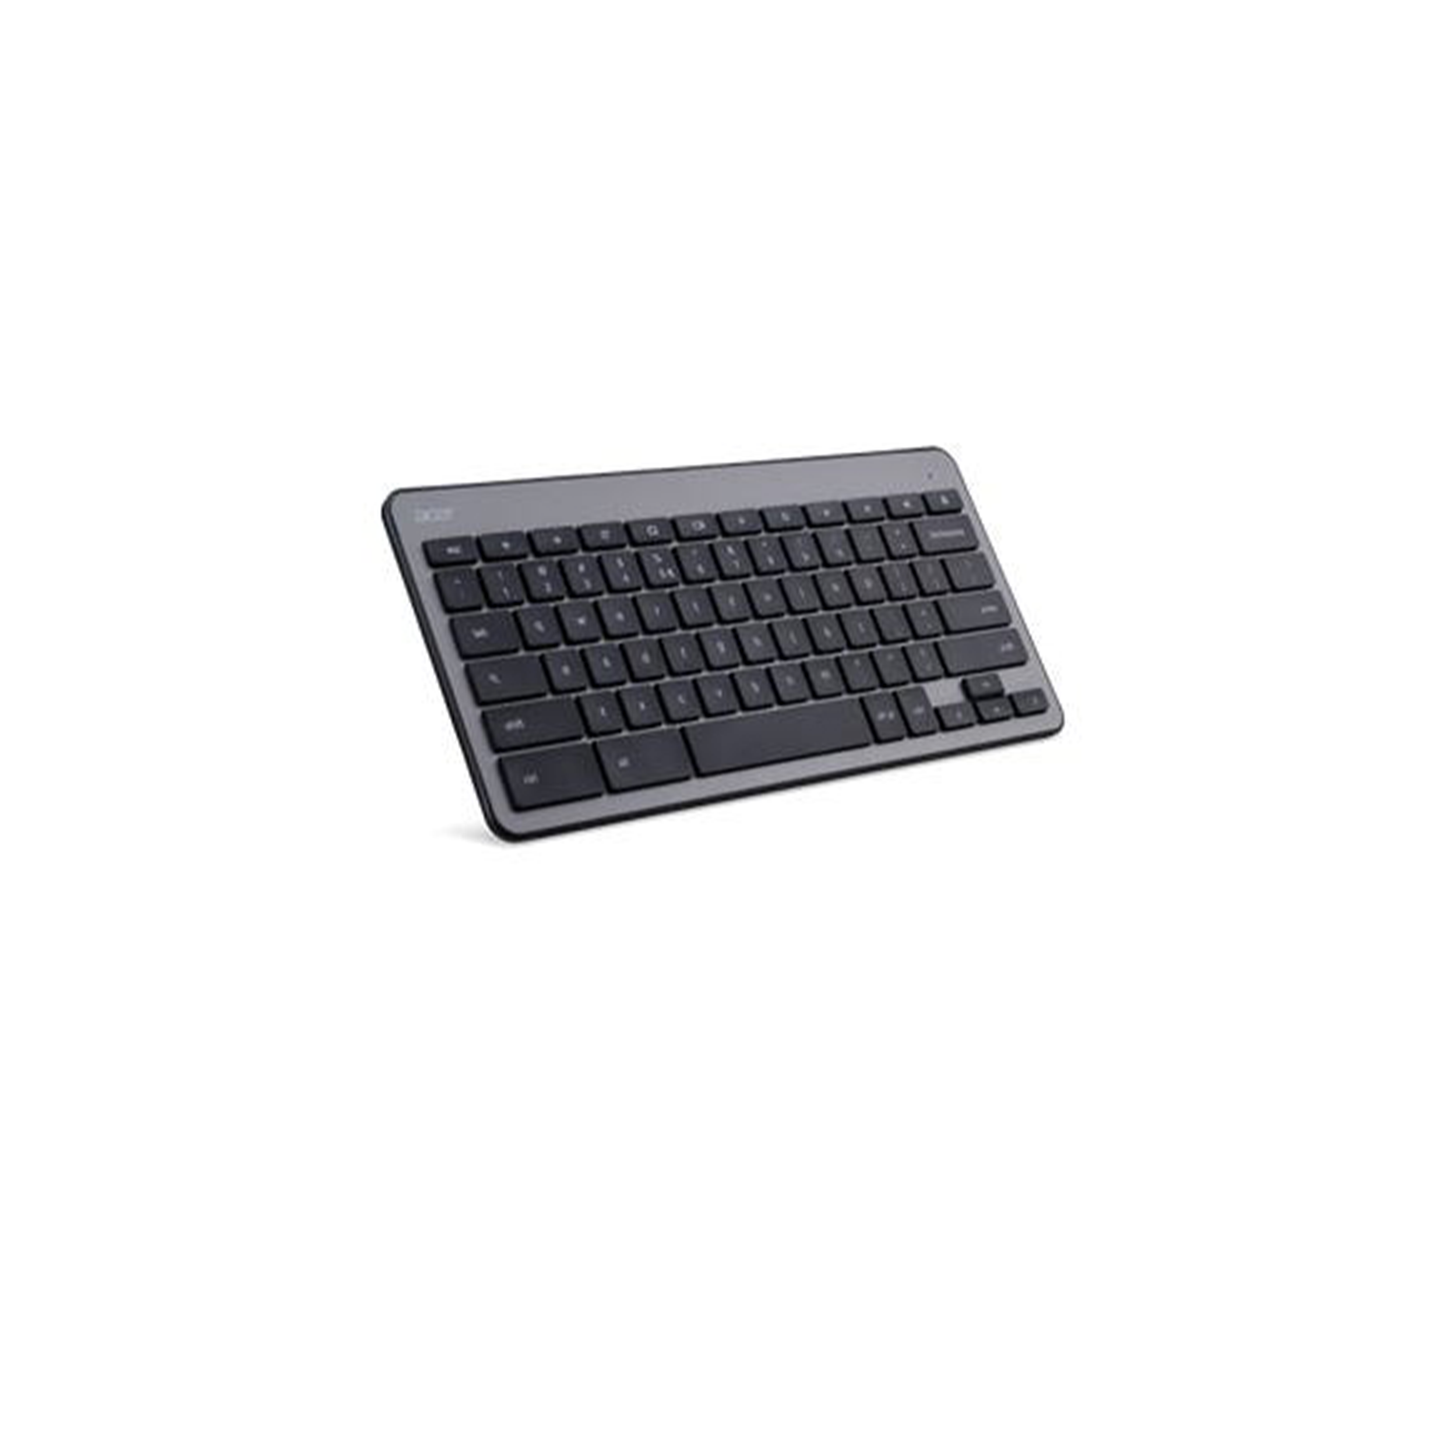 Acer Chrome wireless keyboard and mouse - UK Layout